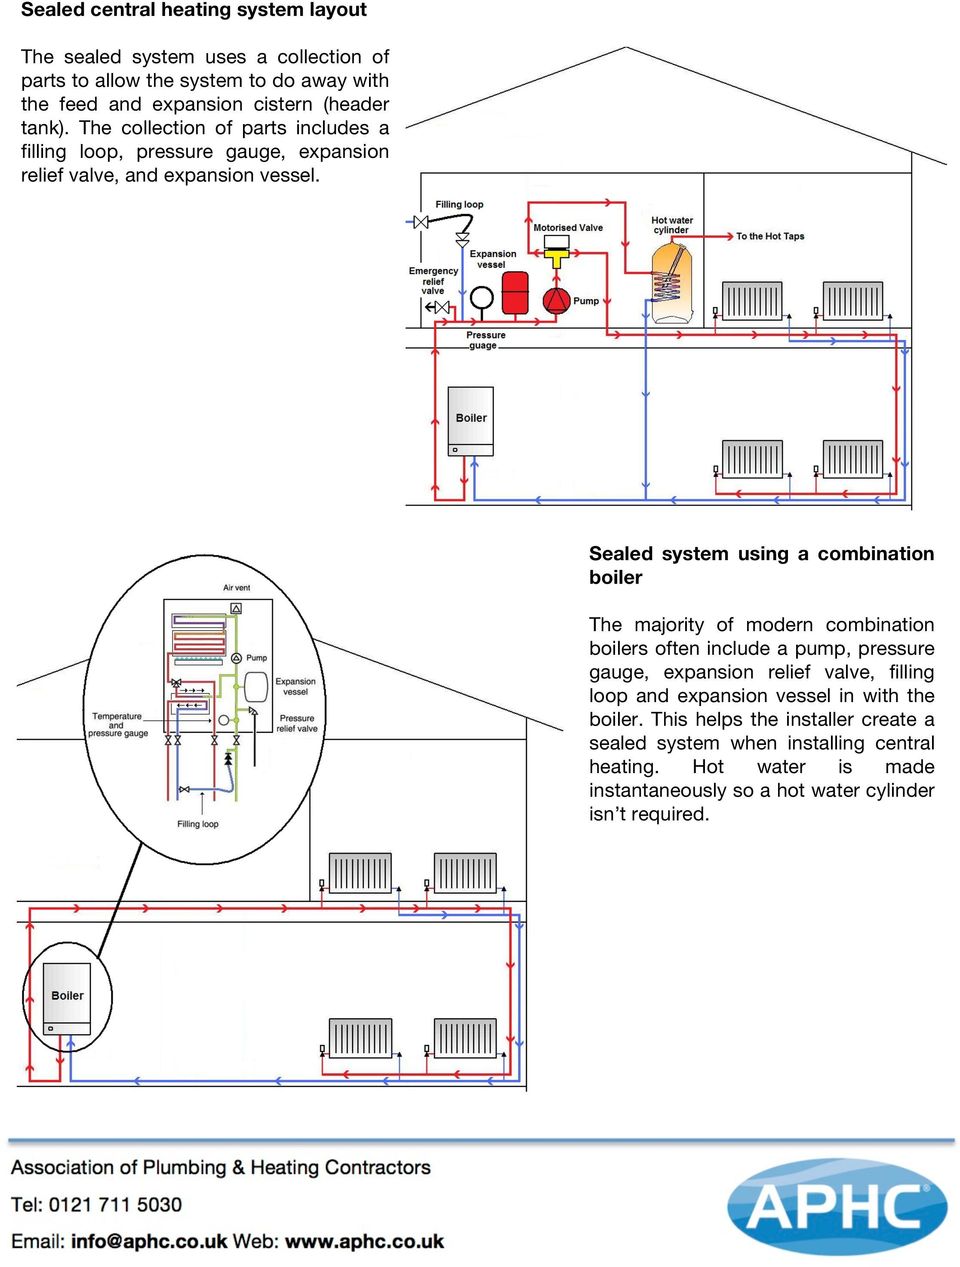 Sealed system using a combination boiler The majority of modern combination boilers often include a pump, pressure gauge, expansion relief valve, filling